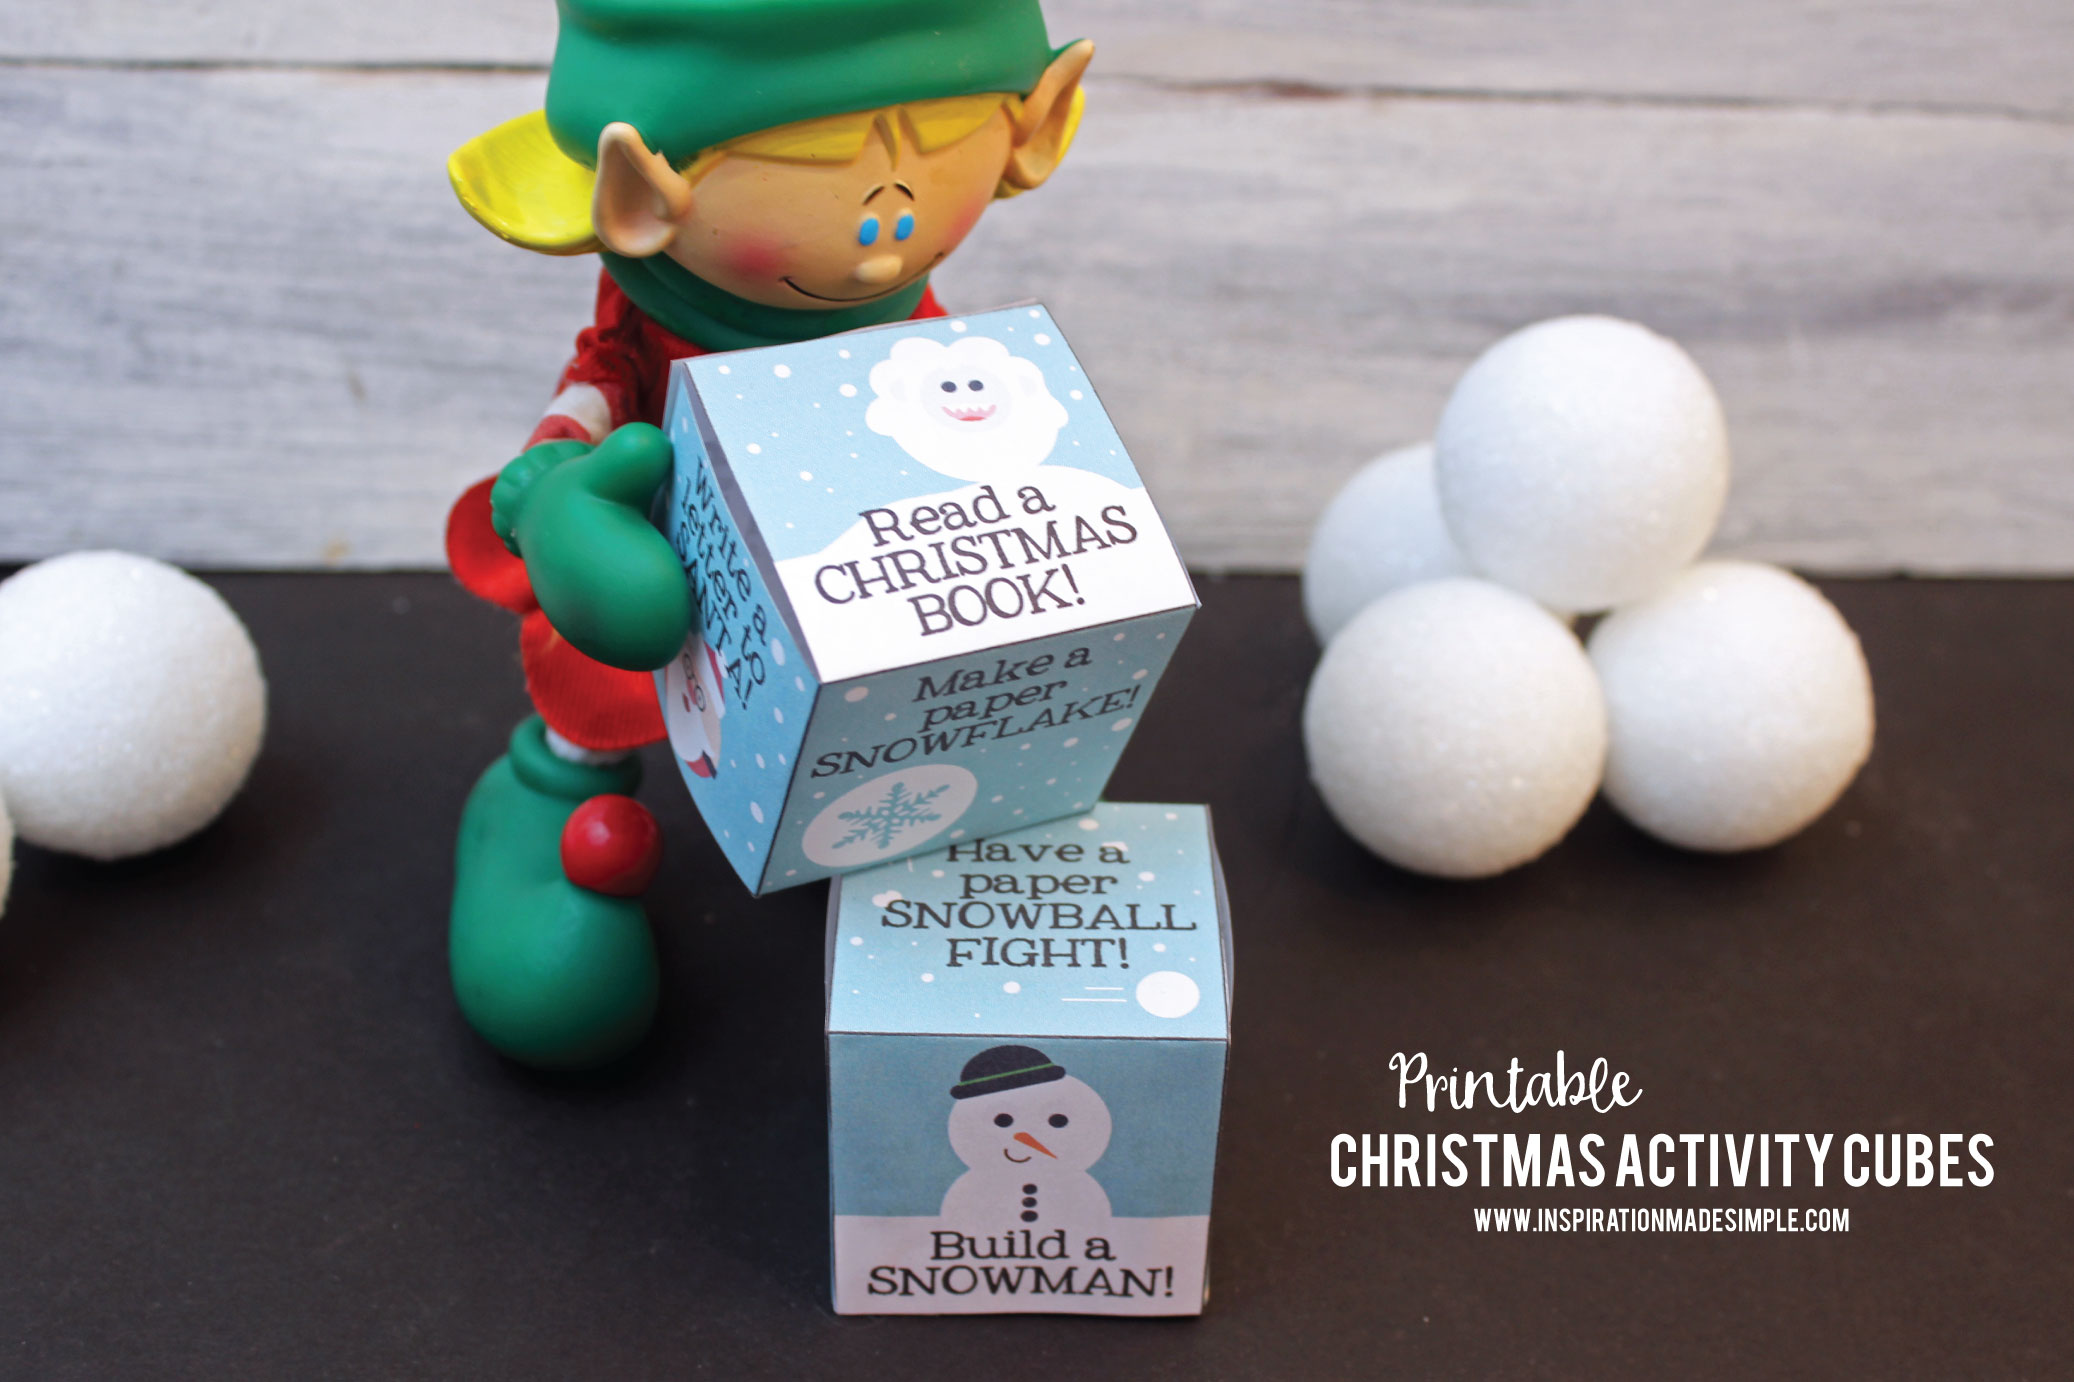 Printable Christmas Activity Cubes - perfect gift from the Elf on the Shelf!